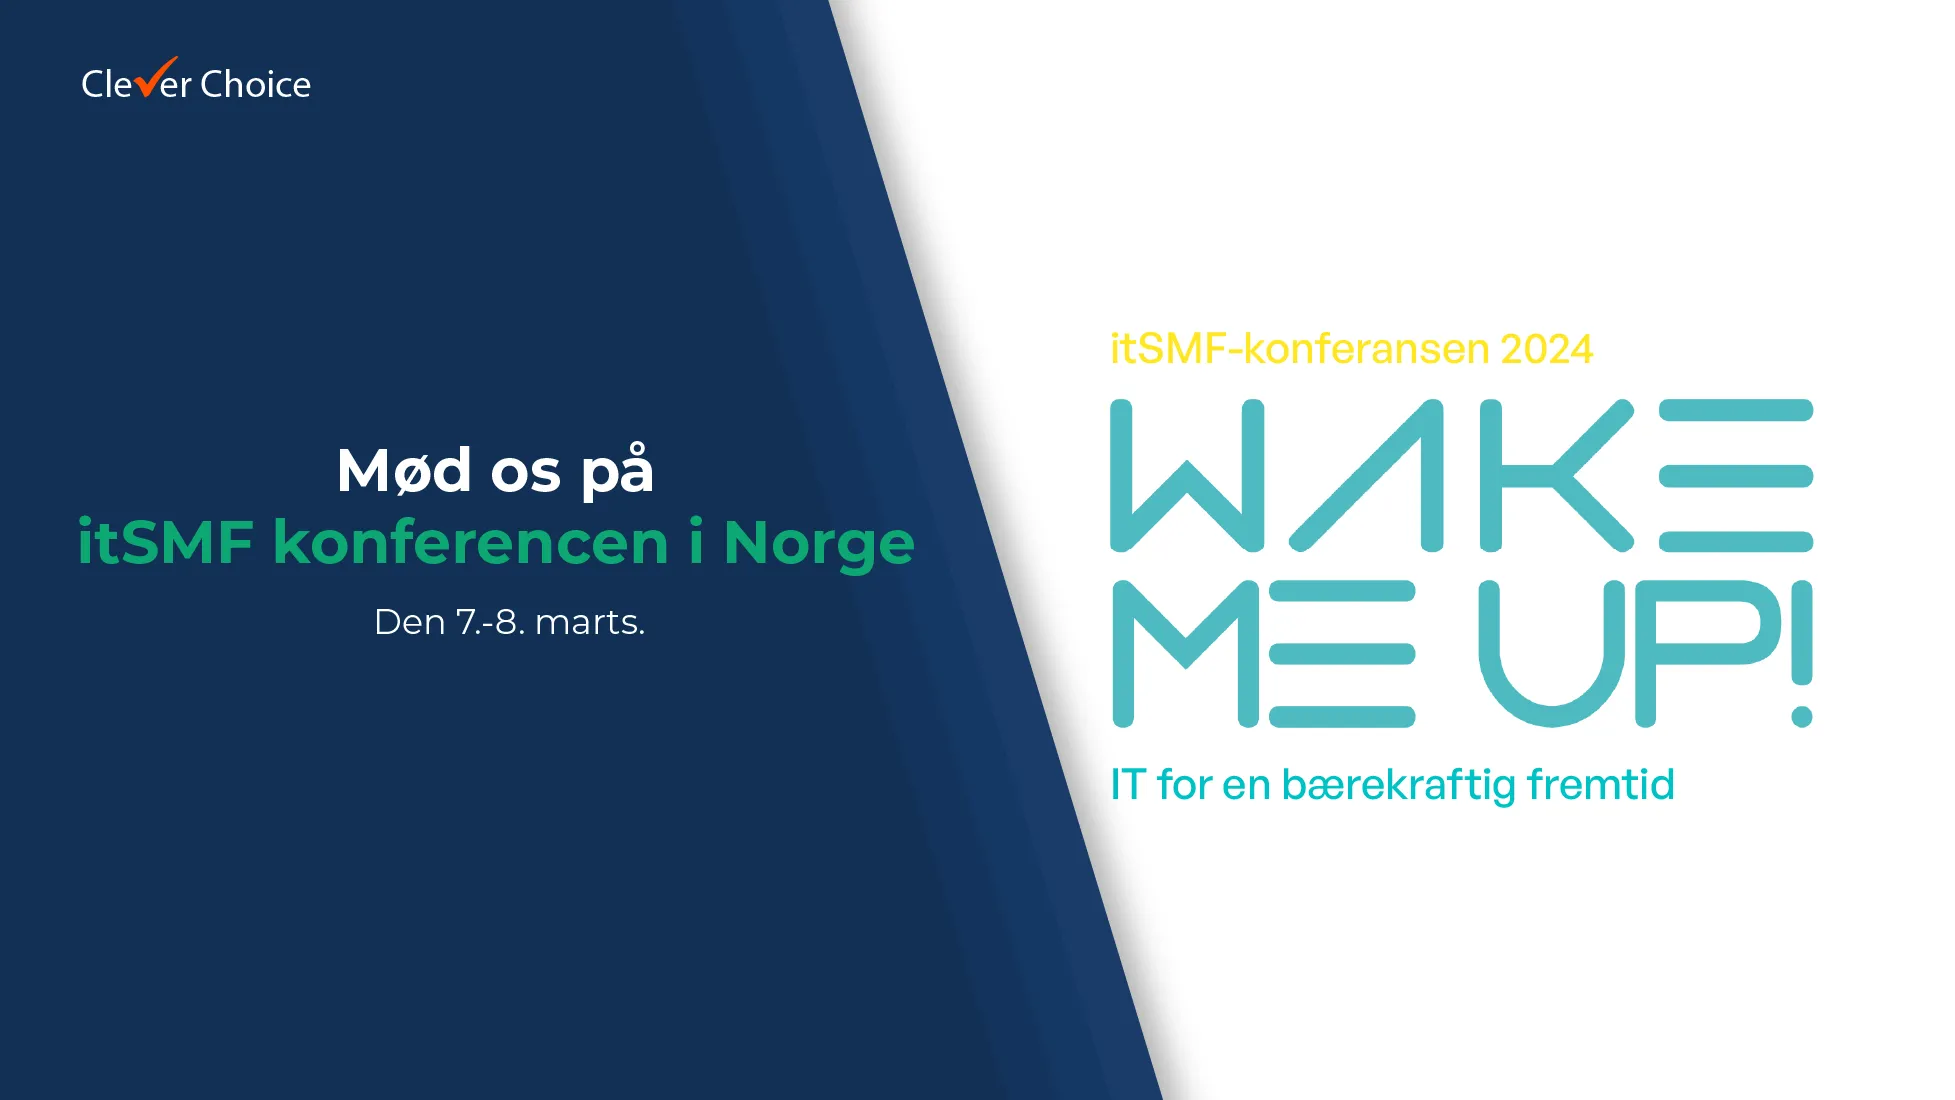 For the third time, Clever Choice will participate in the itSMF conference in Norway, which will be held on 7-8. March.